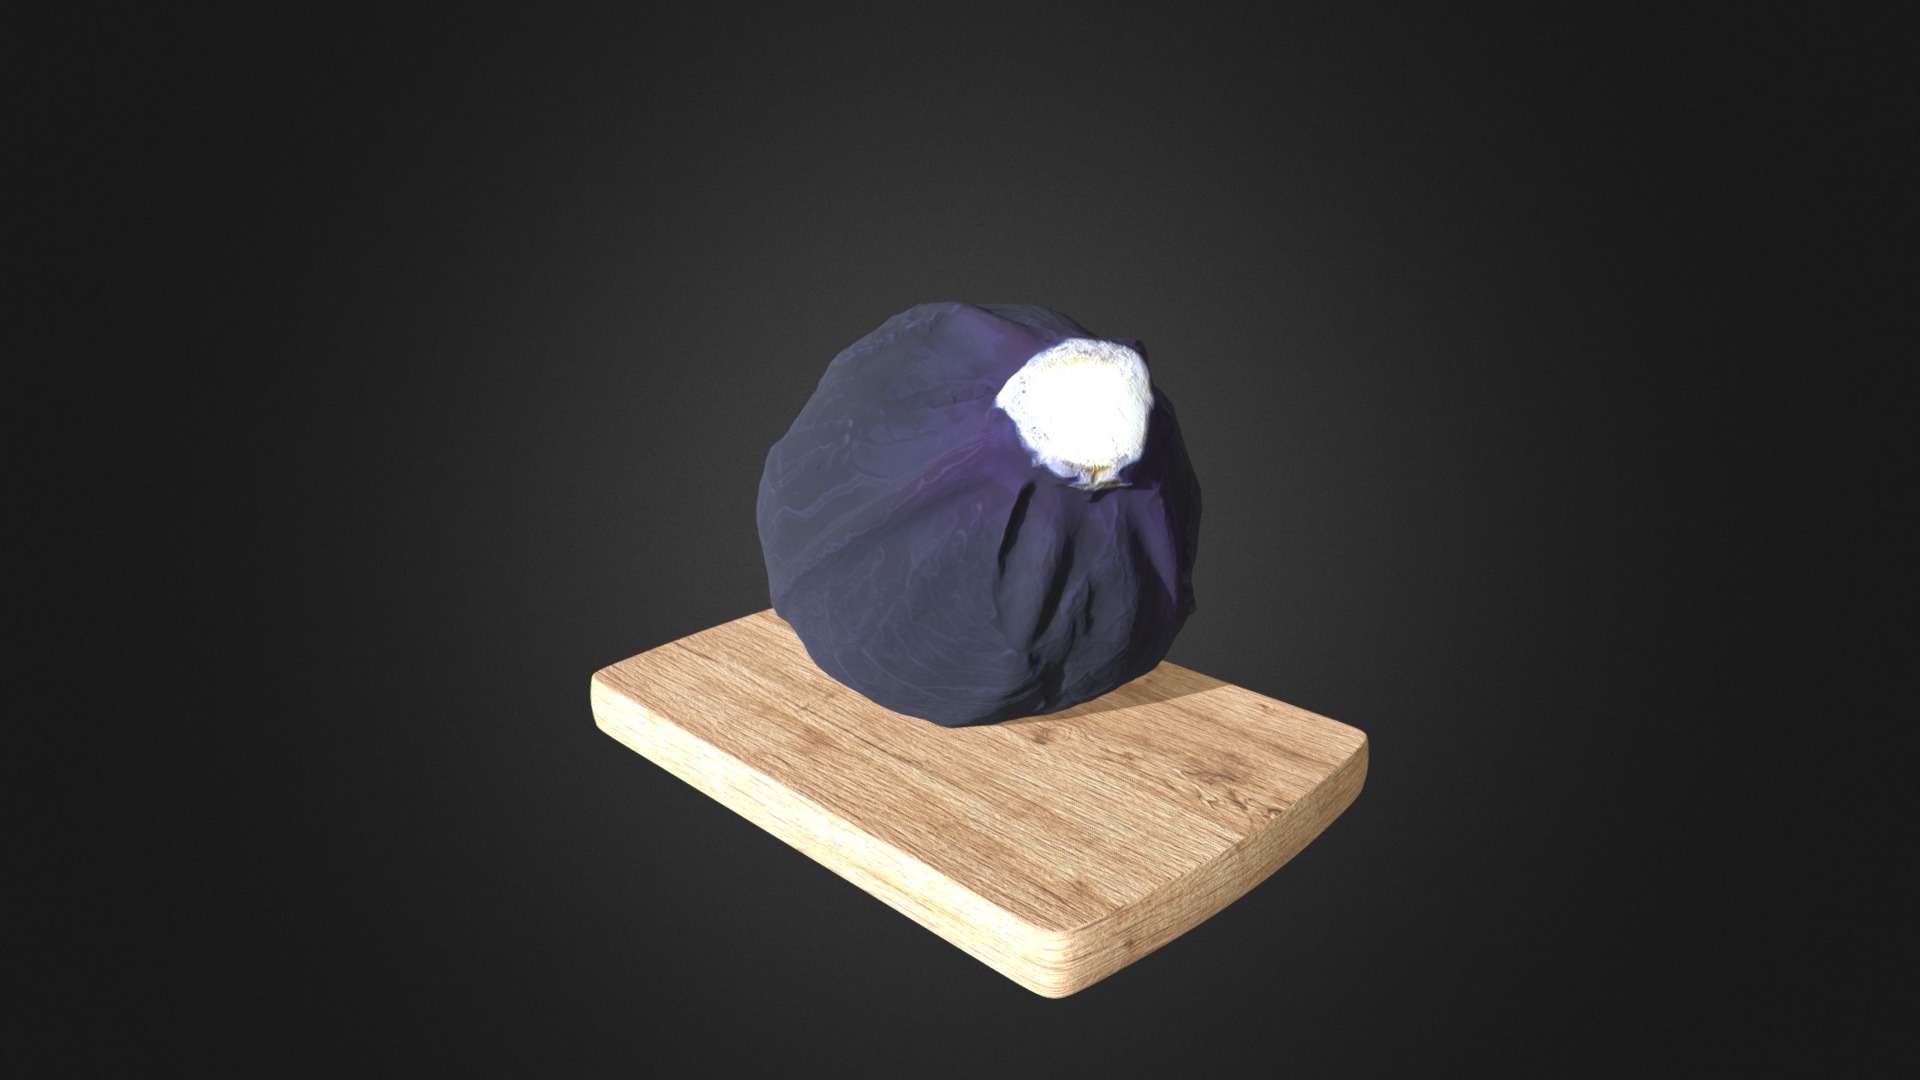 3D model Red Cabbage on Wooden Board - This is a 3D model of the Red Cabbage on Wooden Board. The 3D model is about a blue flower on a wooden surface.